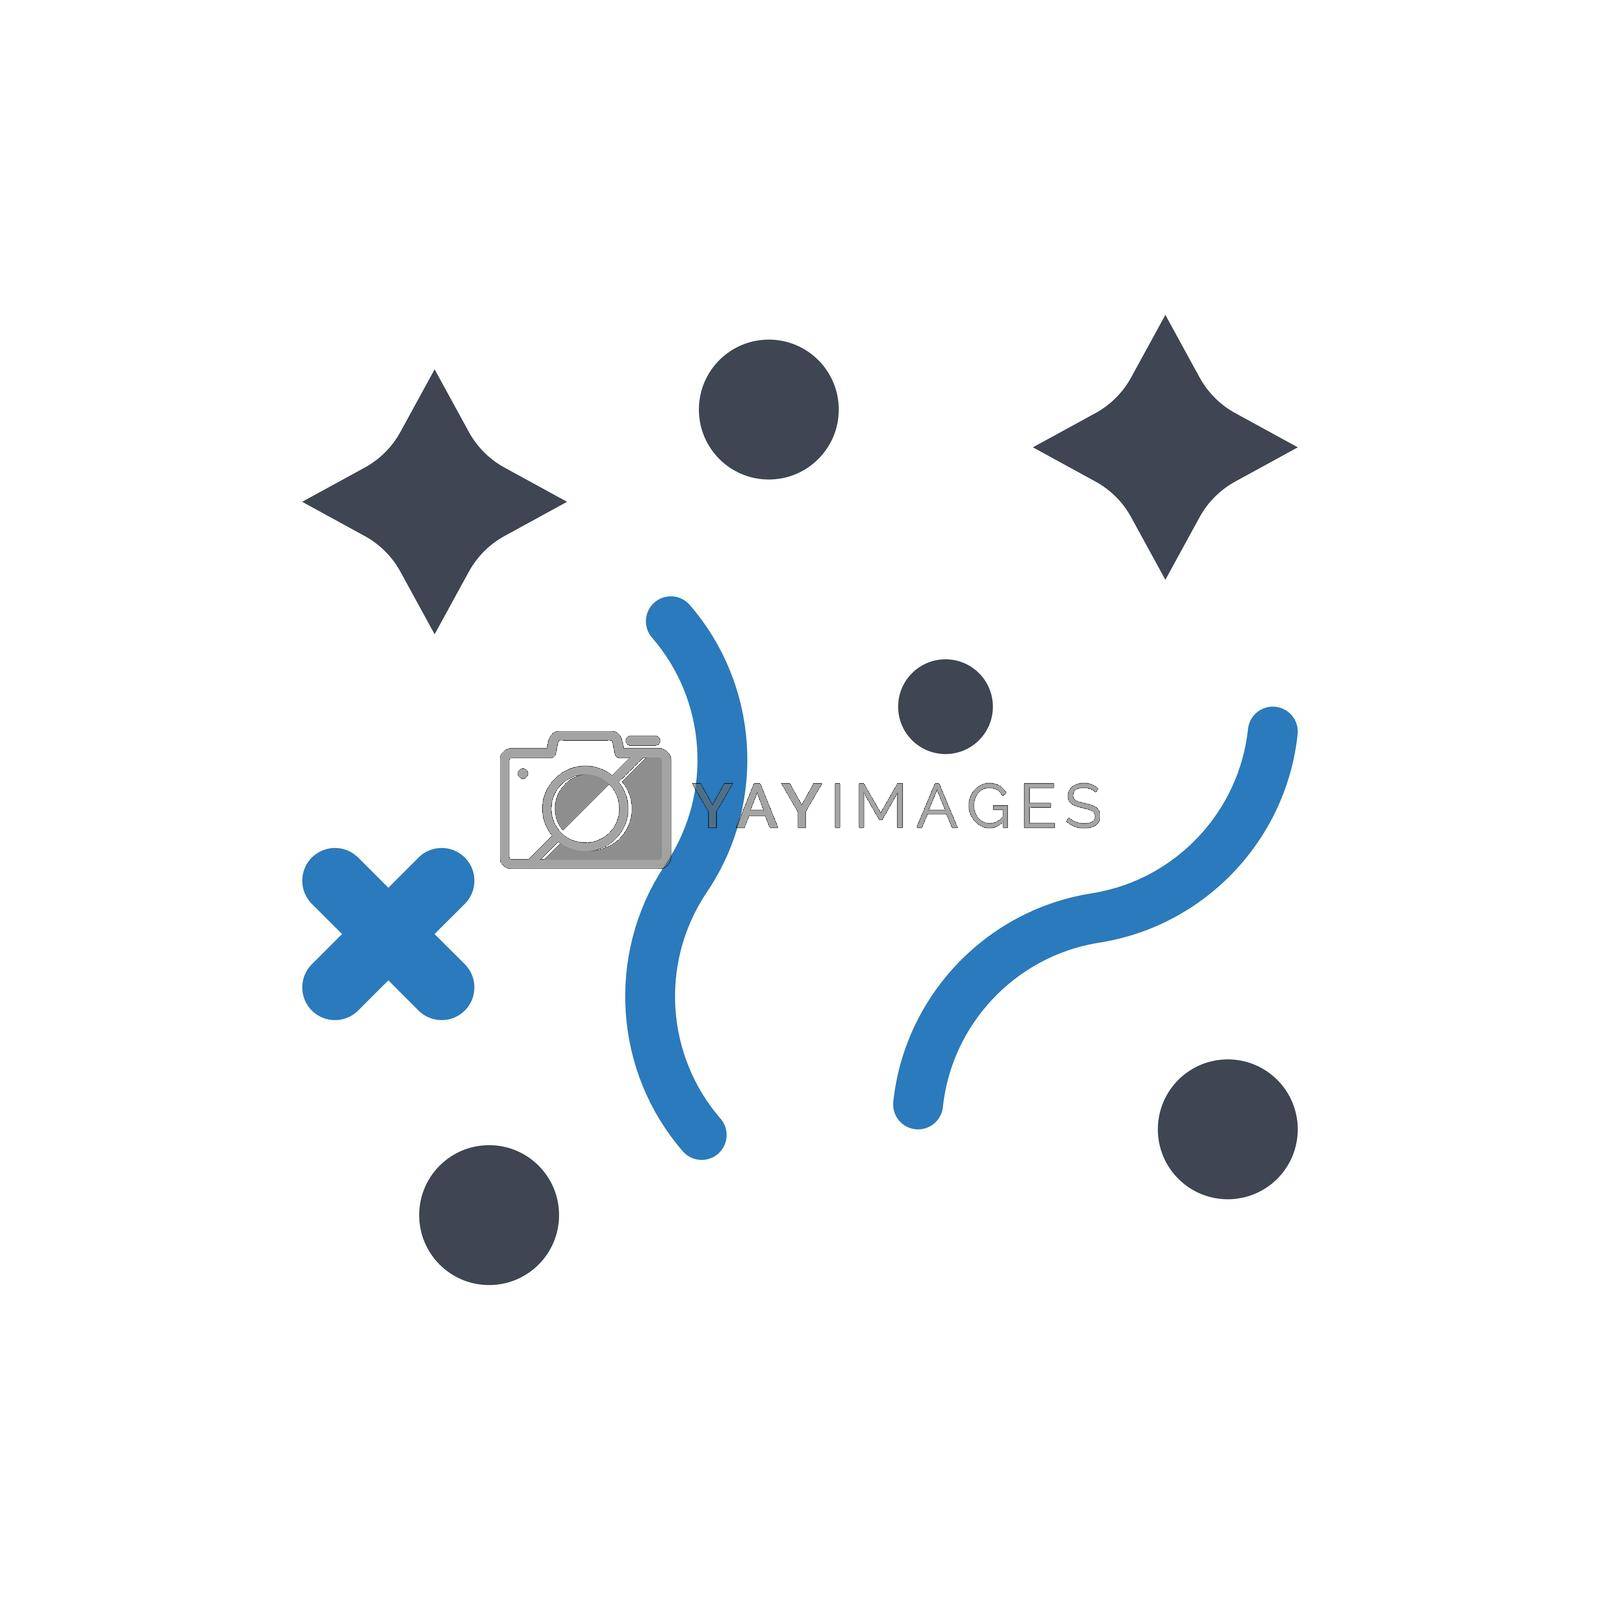 Royalty free image of Party celebration icon by delwar018